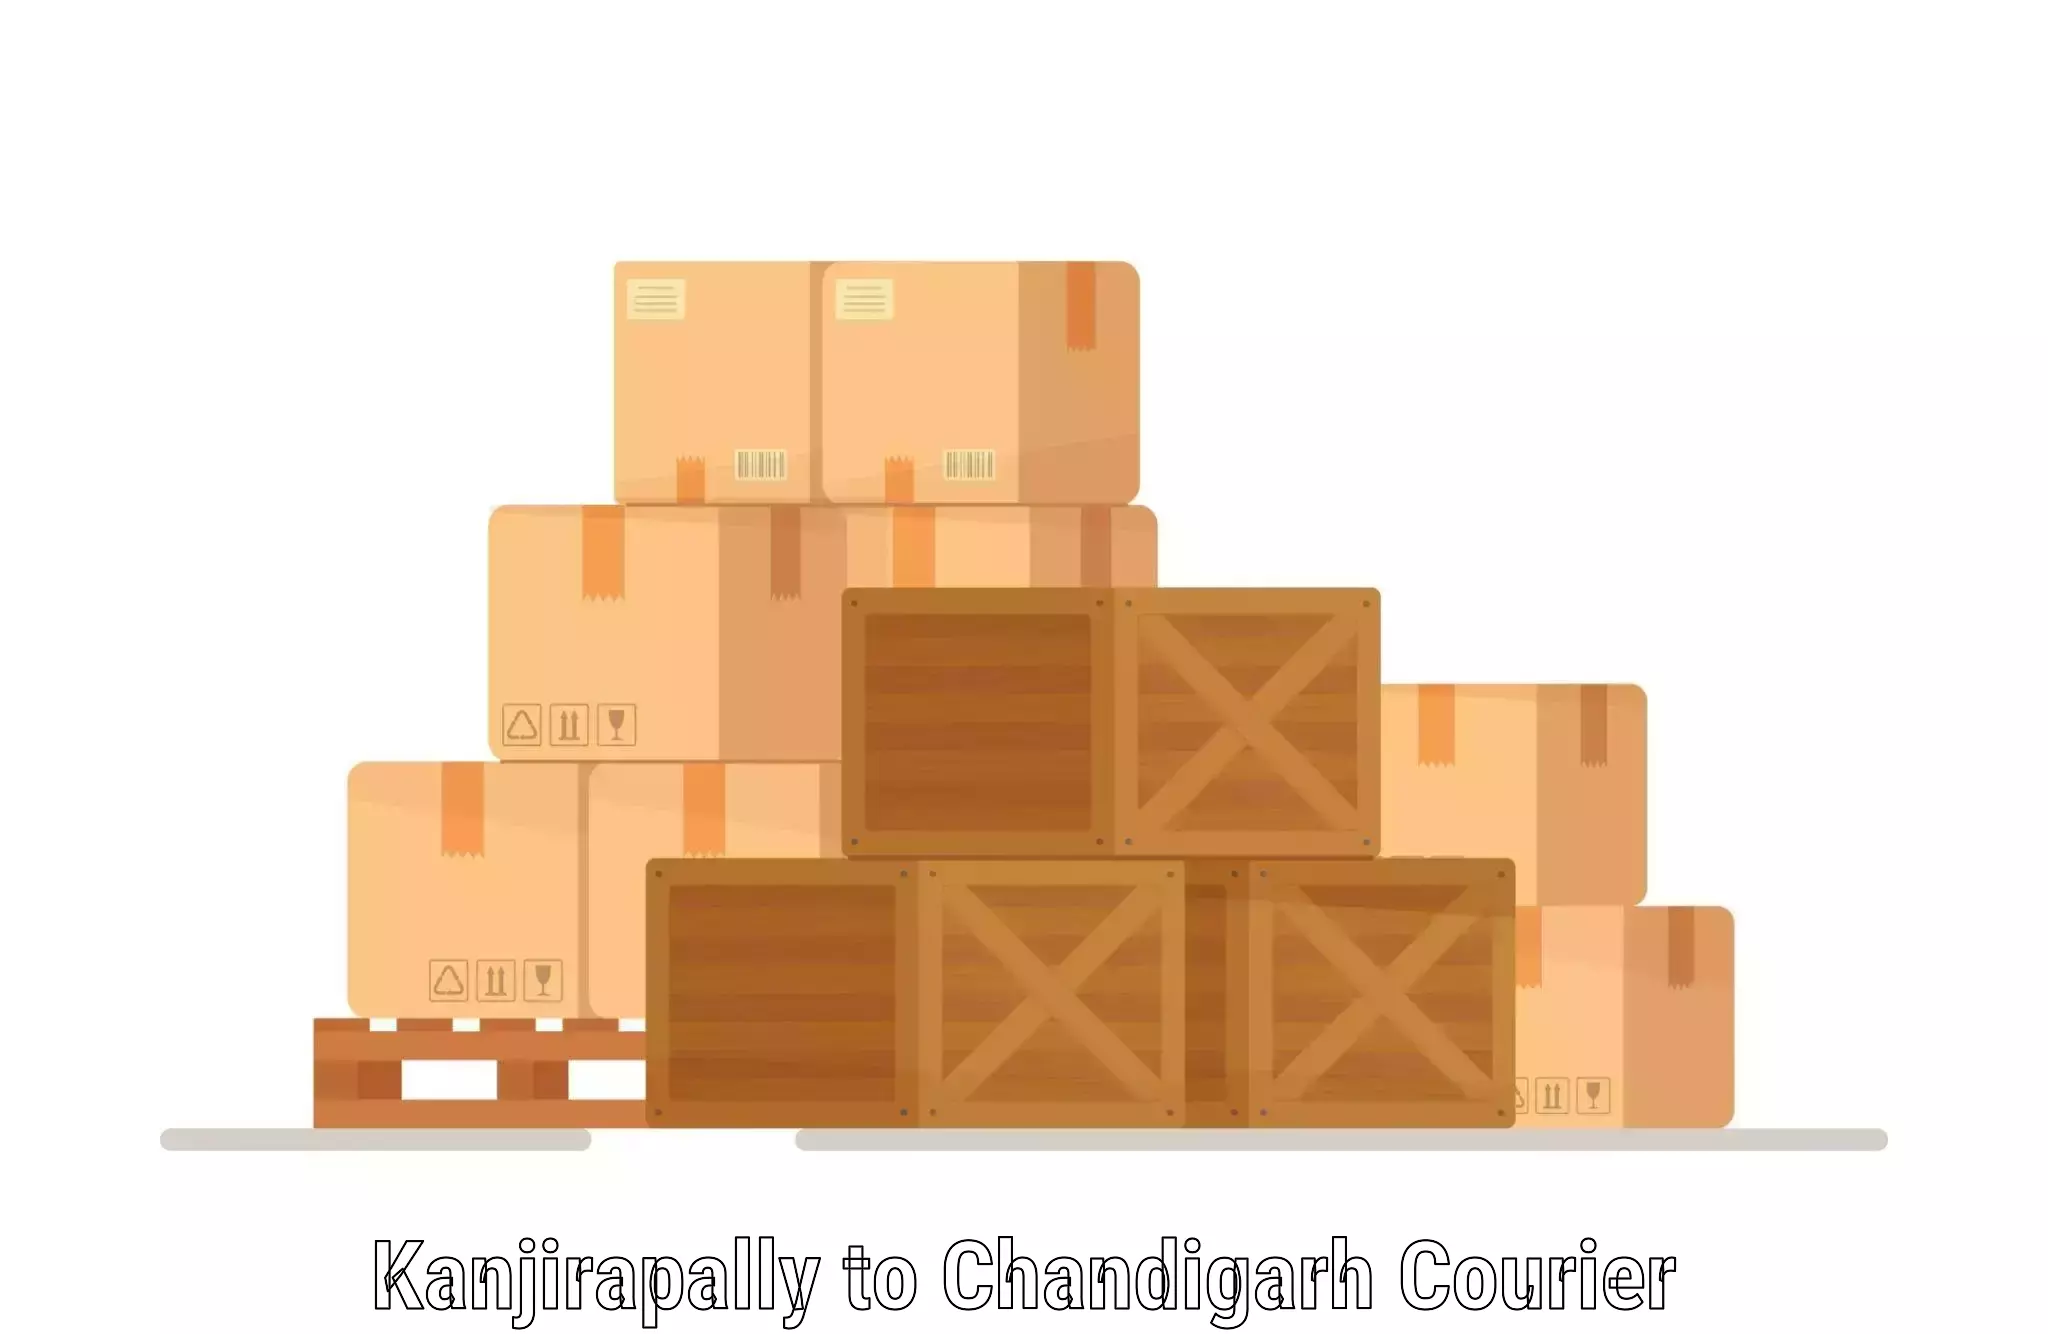 Comprehensive shipping network Kanjirapally to Chandigarh